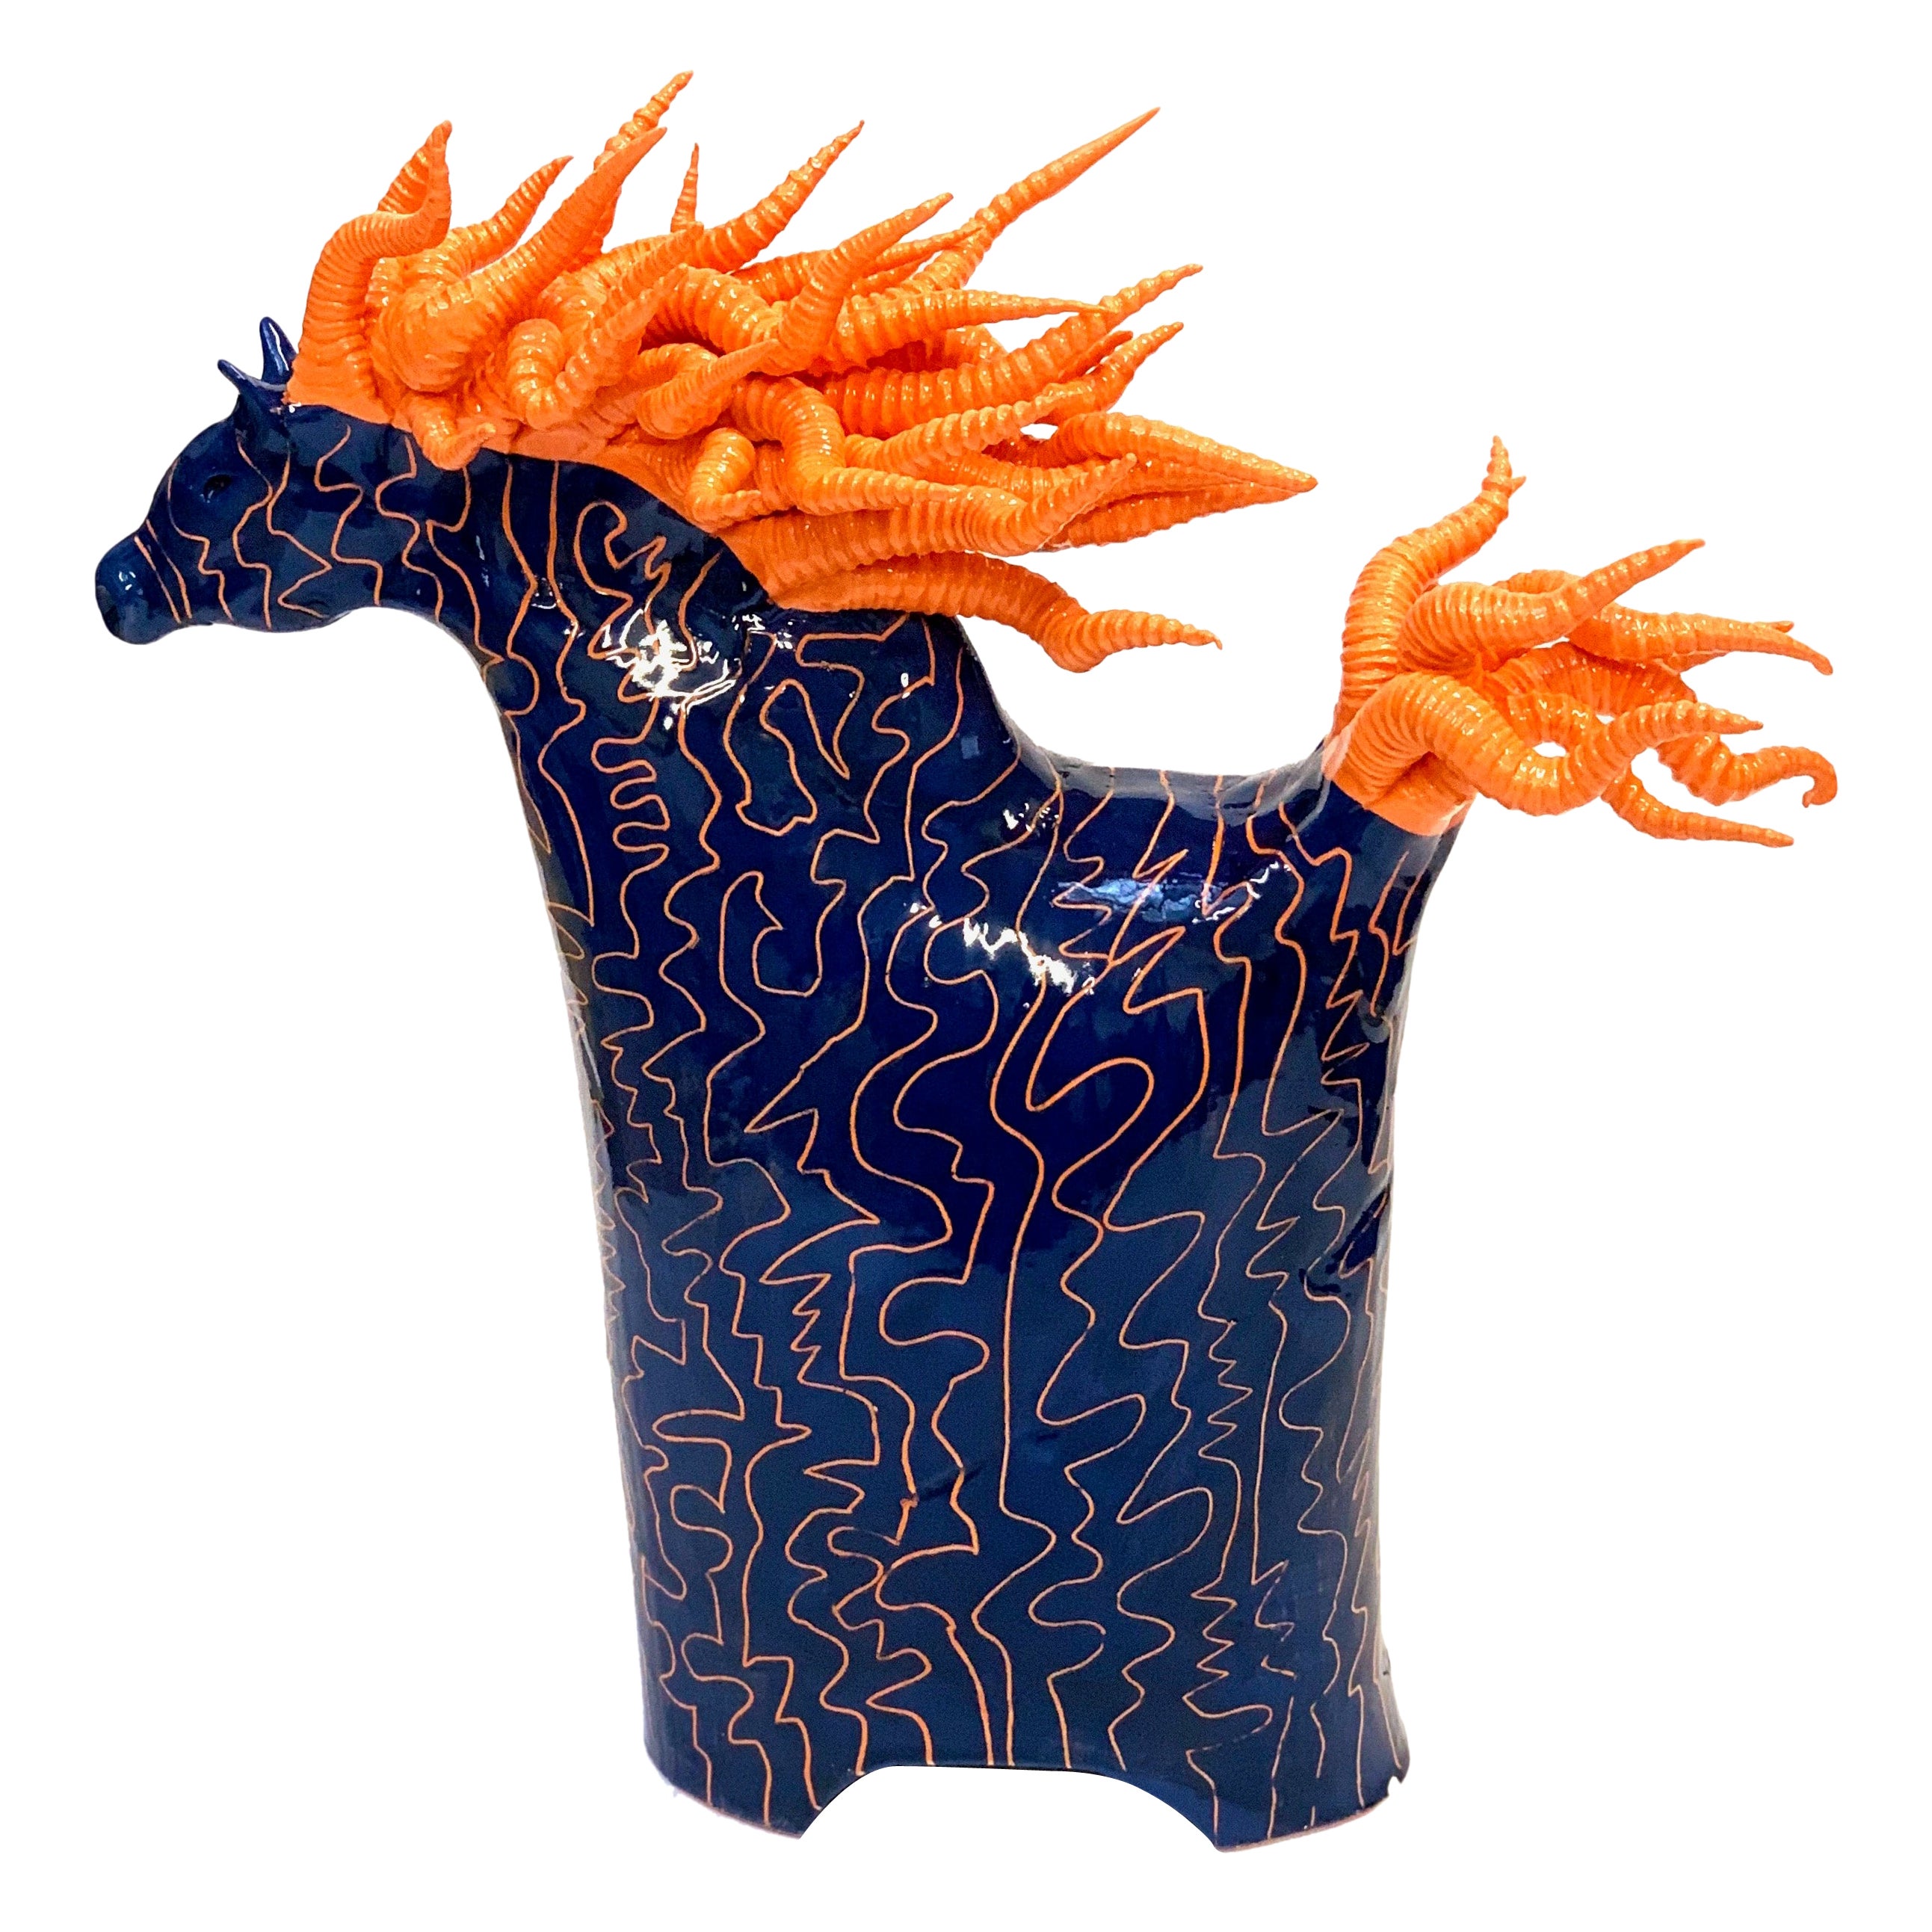 Futurist Horses, Decorative Centerpiece Handmade Italy 2020, Hand-Crafted For Sale